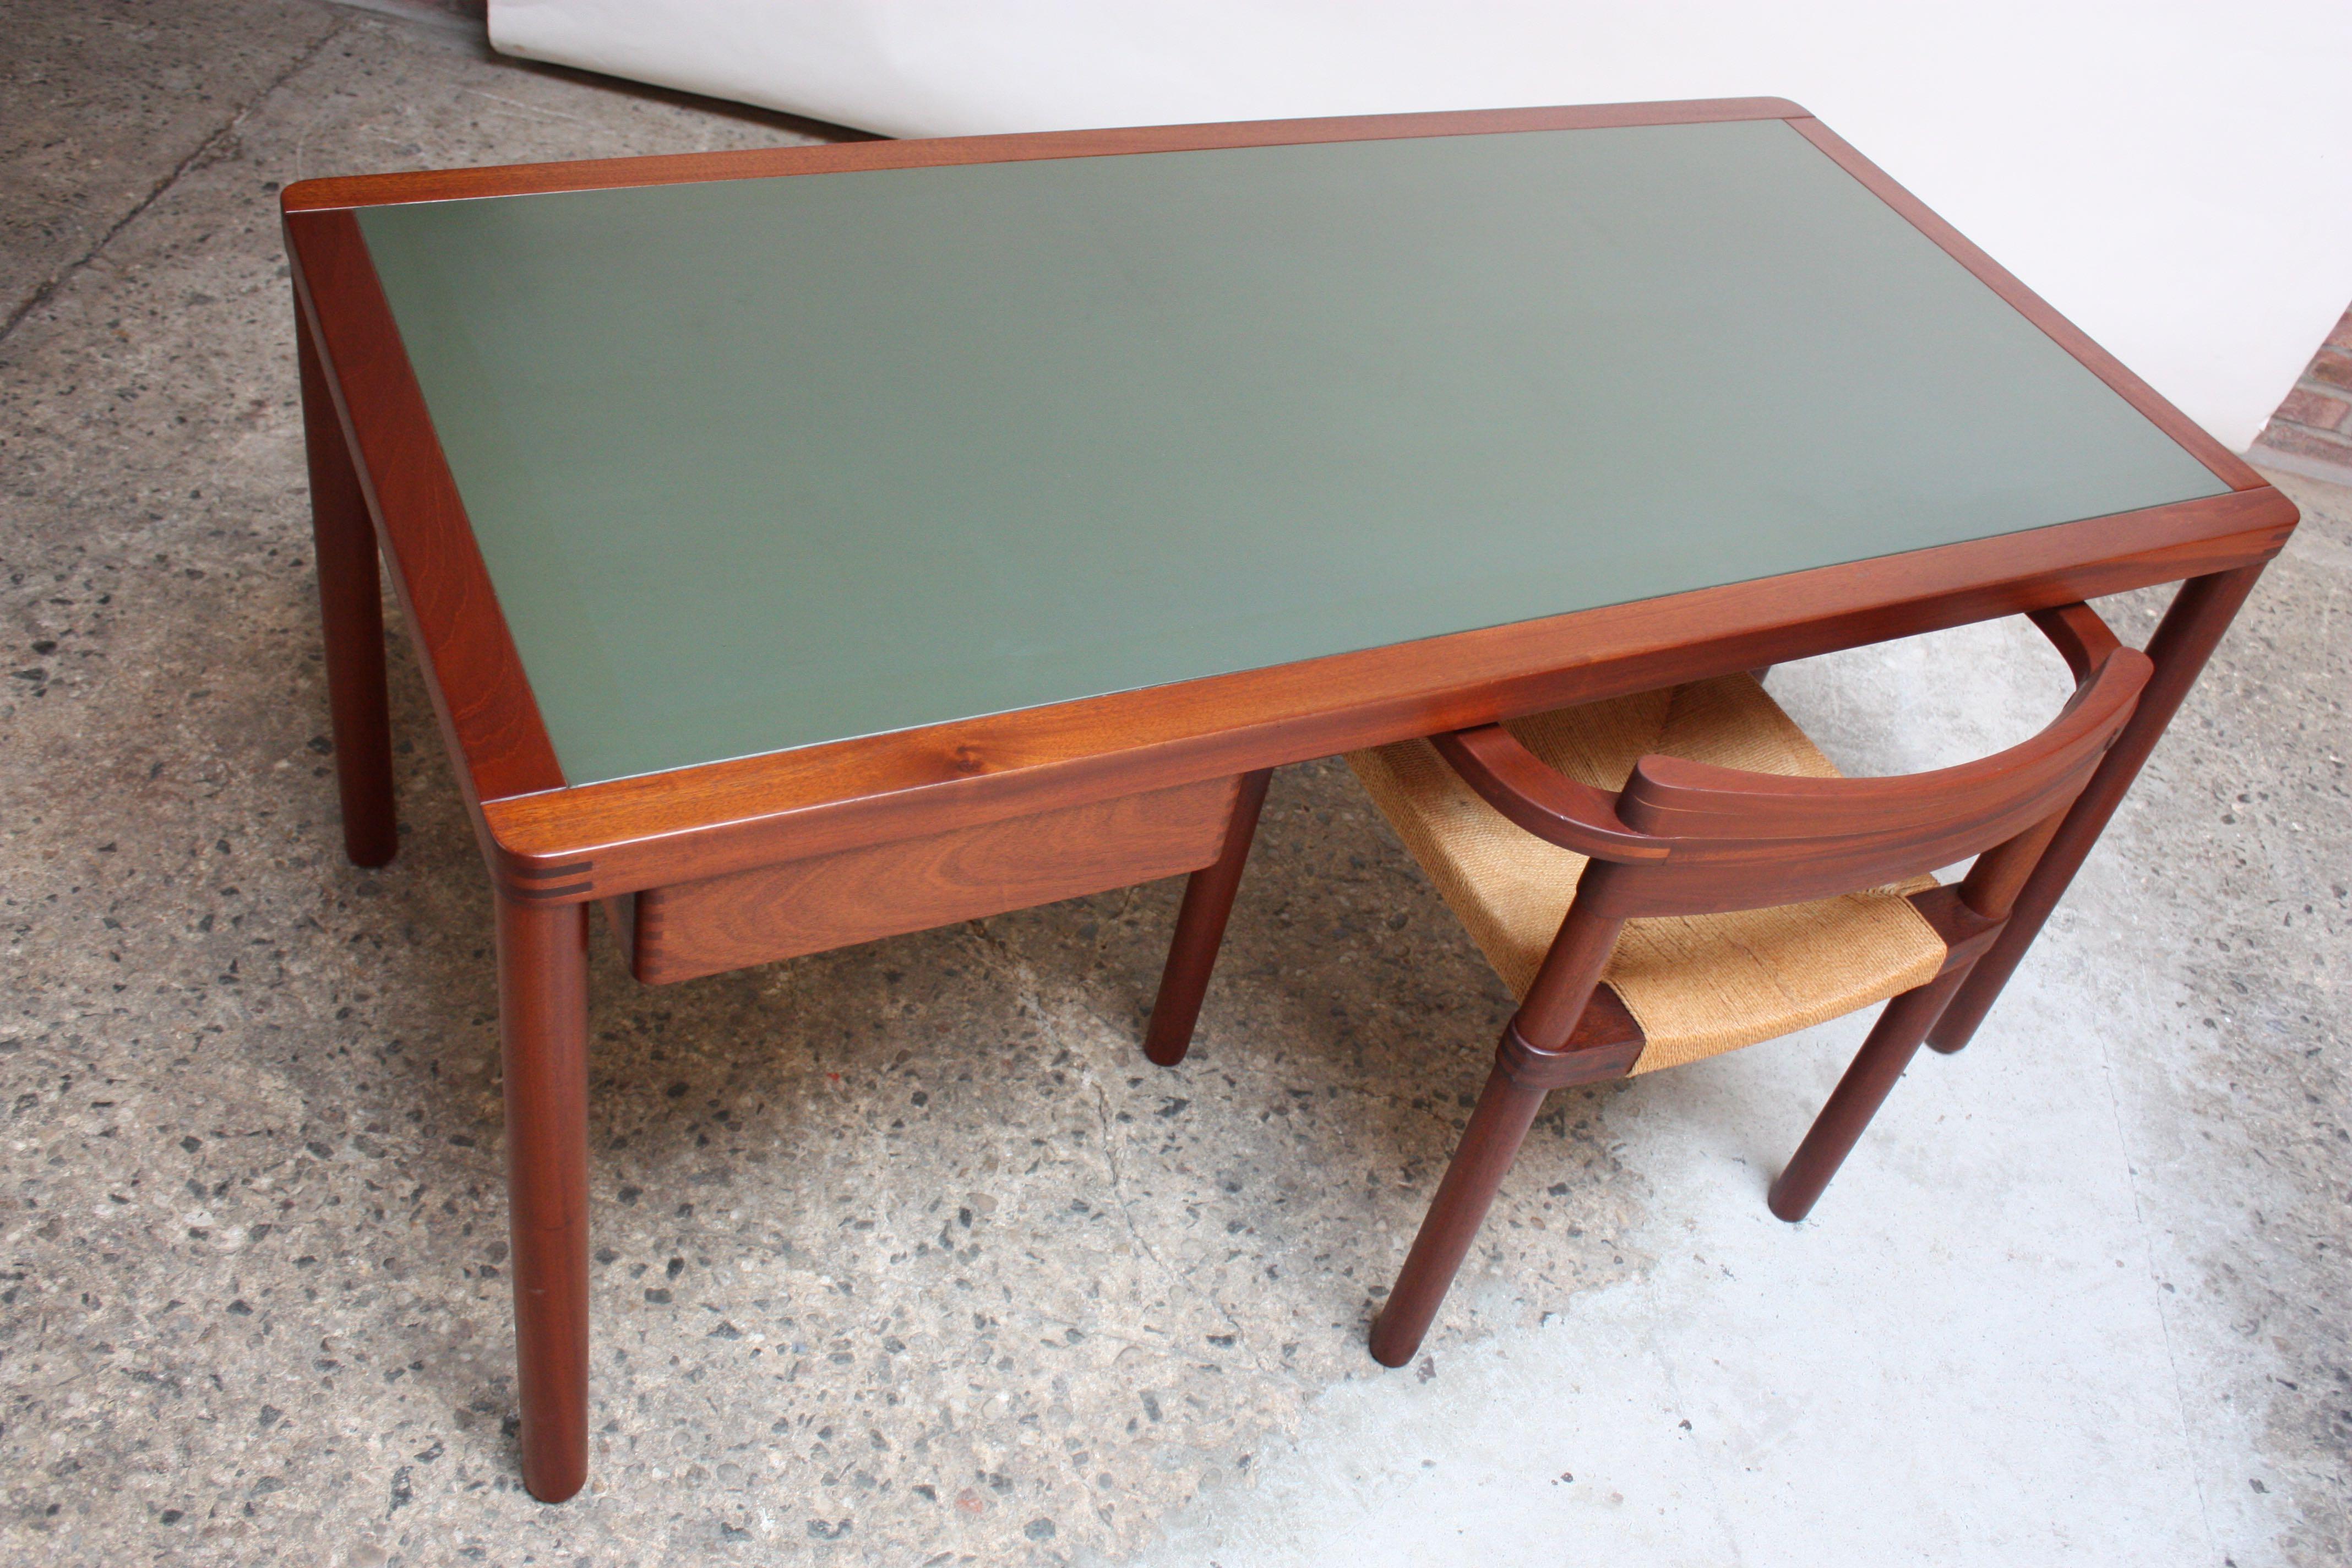 Handsome Danish modern teak desk with nice dovetail and other wood joinery details and rich wood grain. Original green laminate surface is in nice, vintage shape with light wear (small rings and few spots of discoloration). Single drawer, which